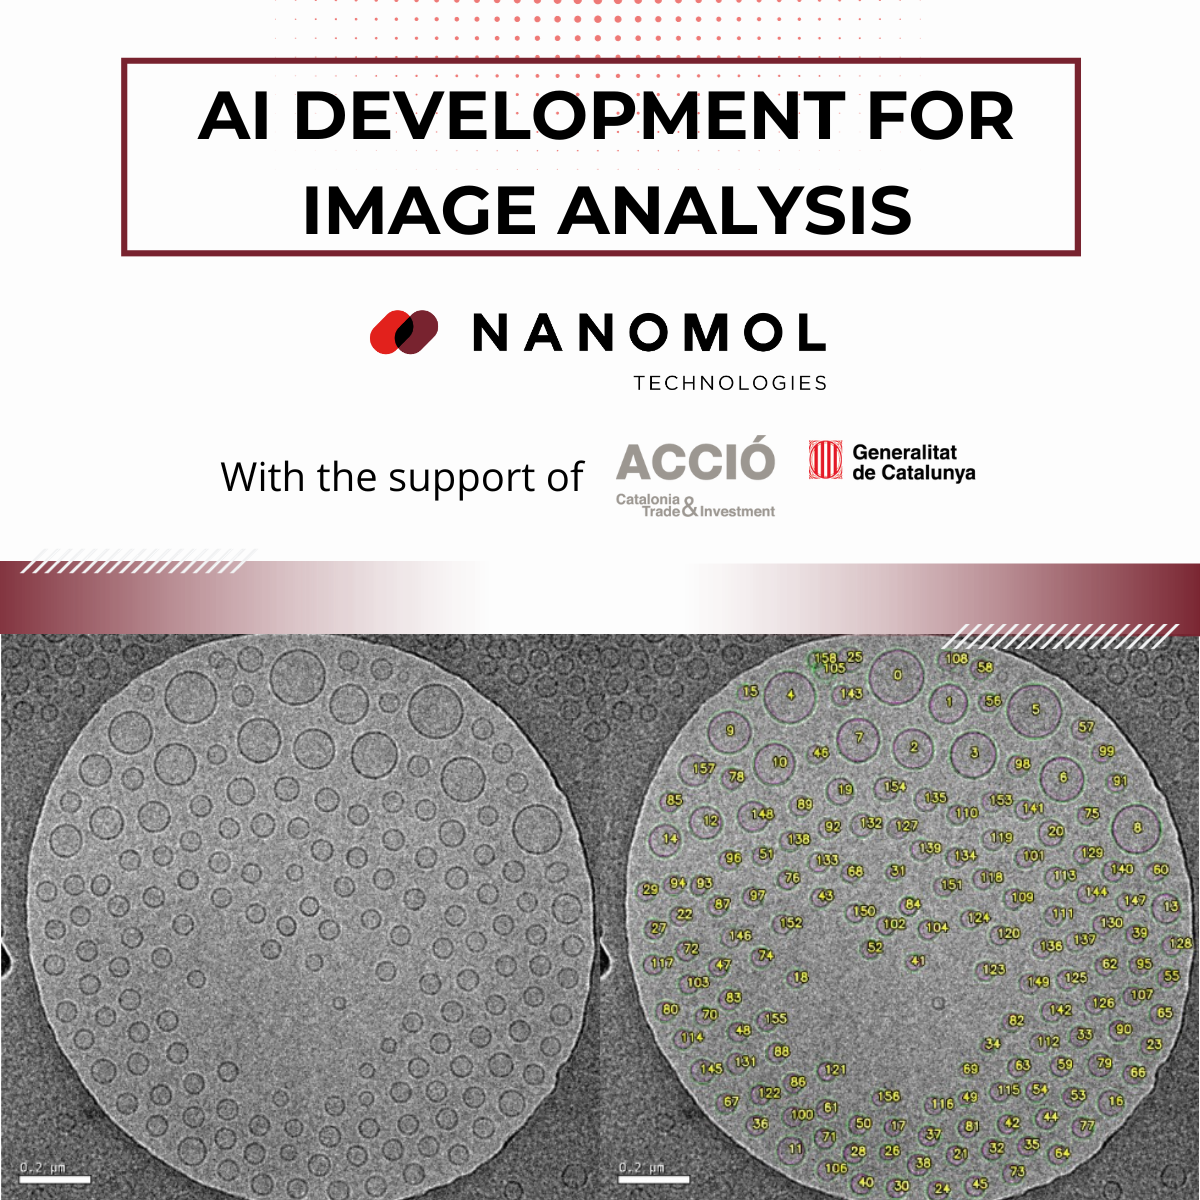 NANOMOL TECHNOLOGIES GETS DEEPER IN THE DEVELOPMENT OF ARTIFICIAL INTELLIGENCE TOOLS FOR THE IMAGE ANALYSIS FROM ELECTRONIC MICROSCOPE IMAGES.